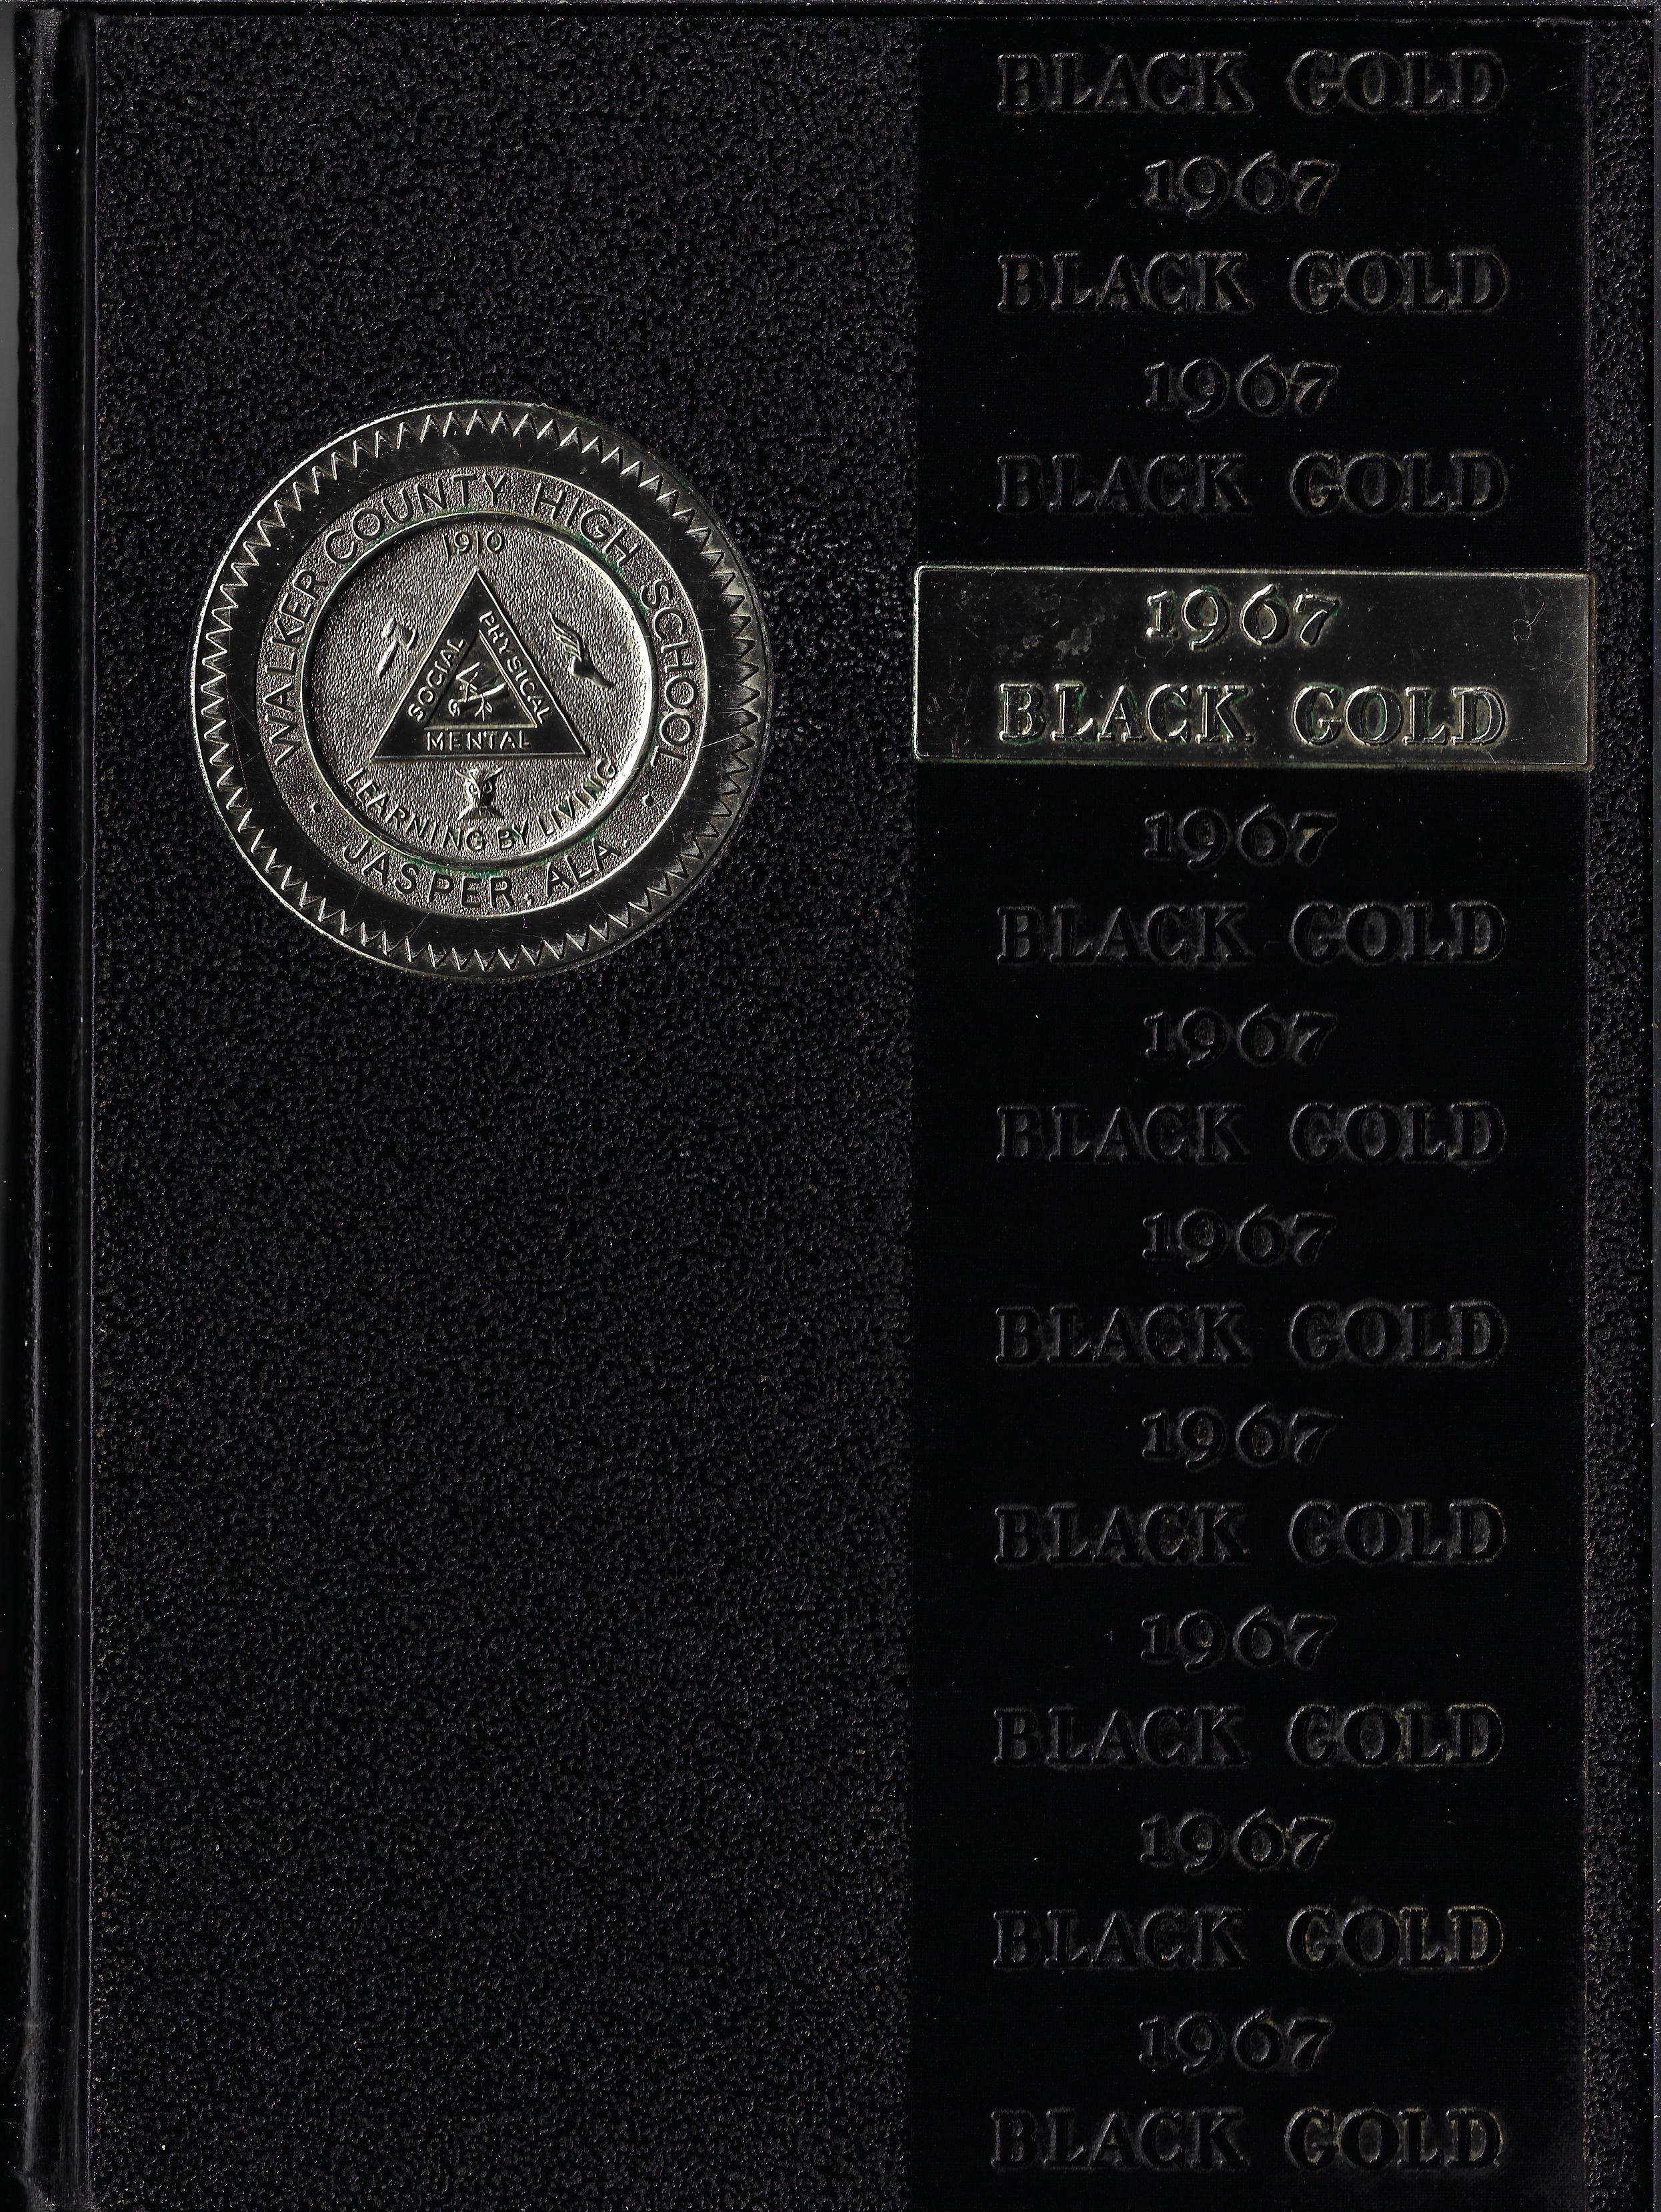 1967 Black Gold Front Cover